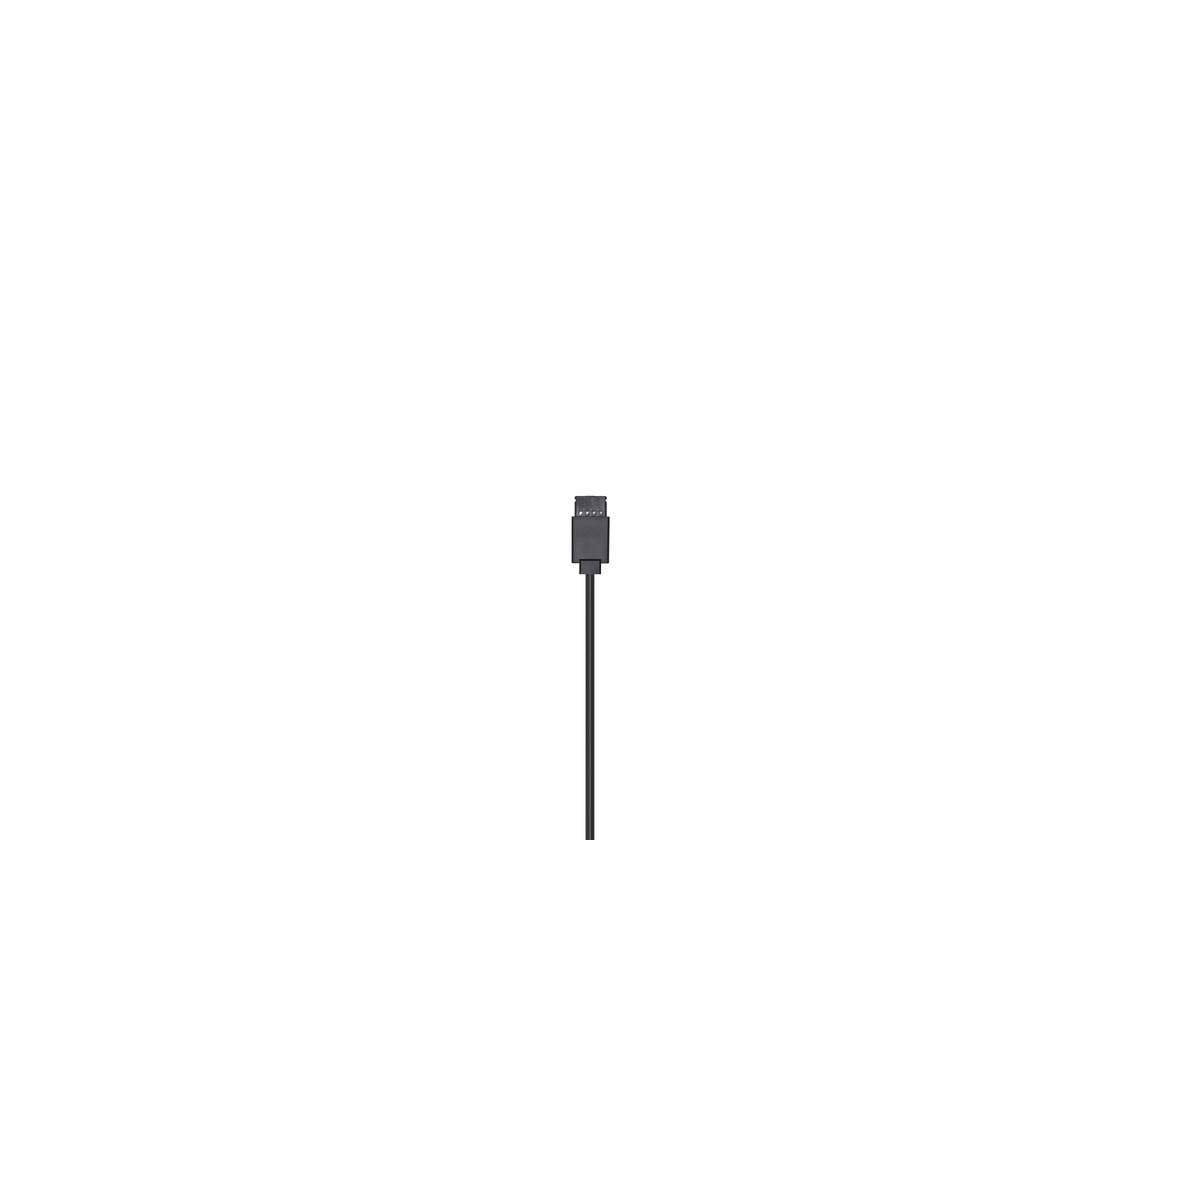 dji-ronin-s-part-9-dc-power-cable (1)